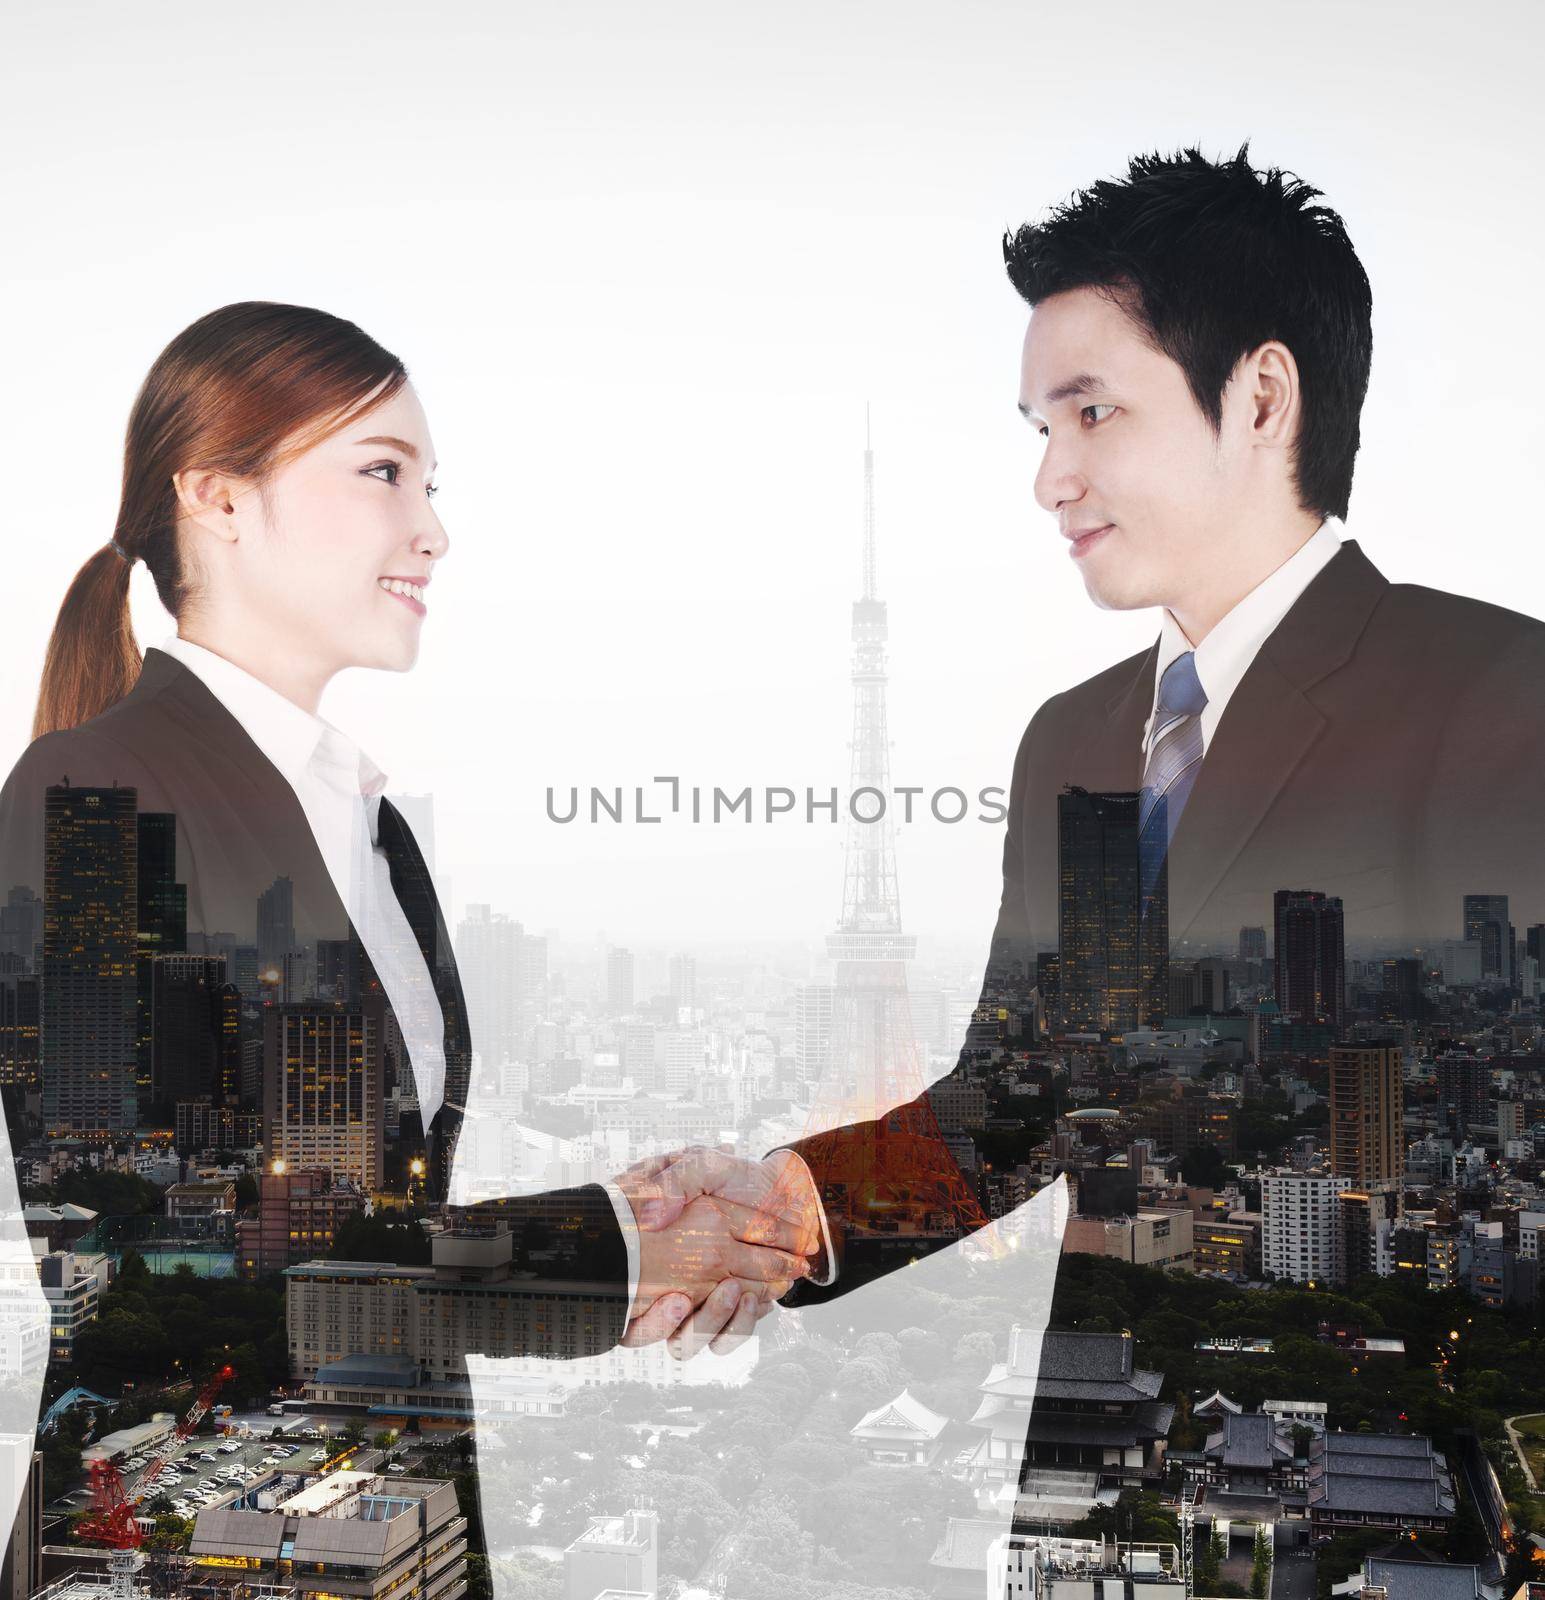 double exposure of shaking hand between businessman and businesswoman with a city background